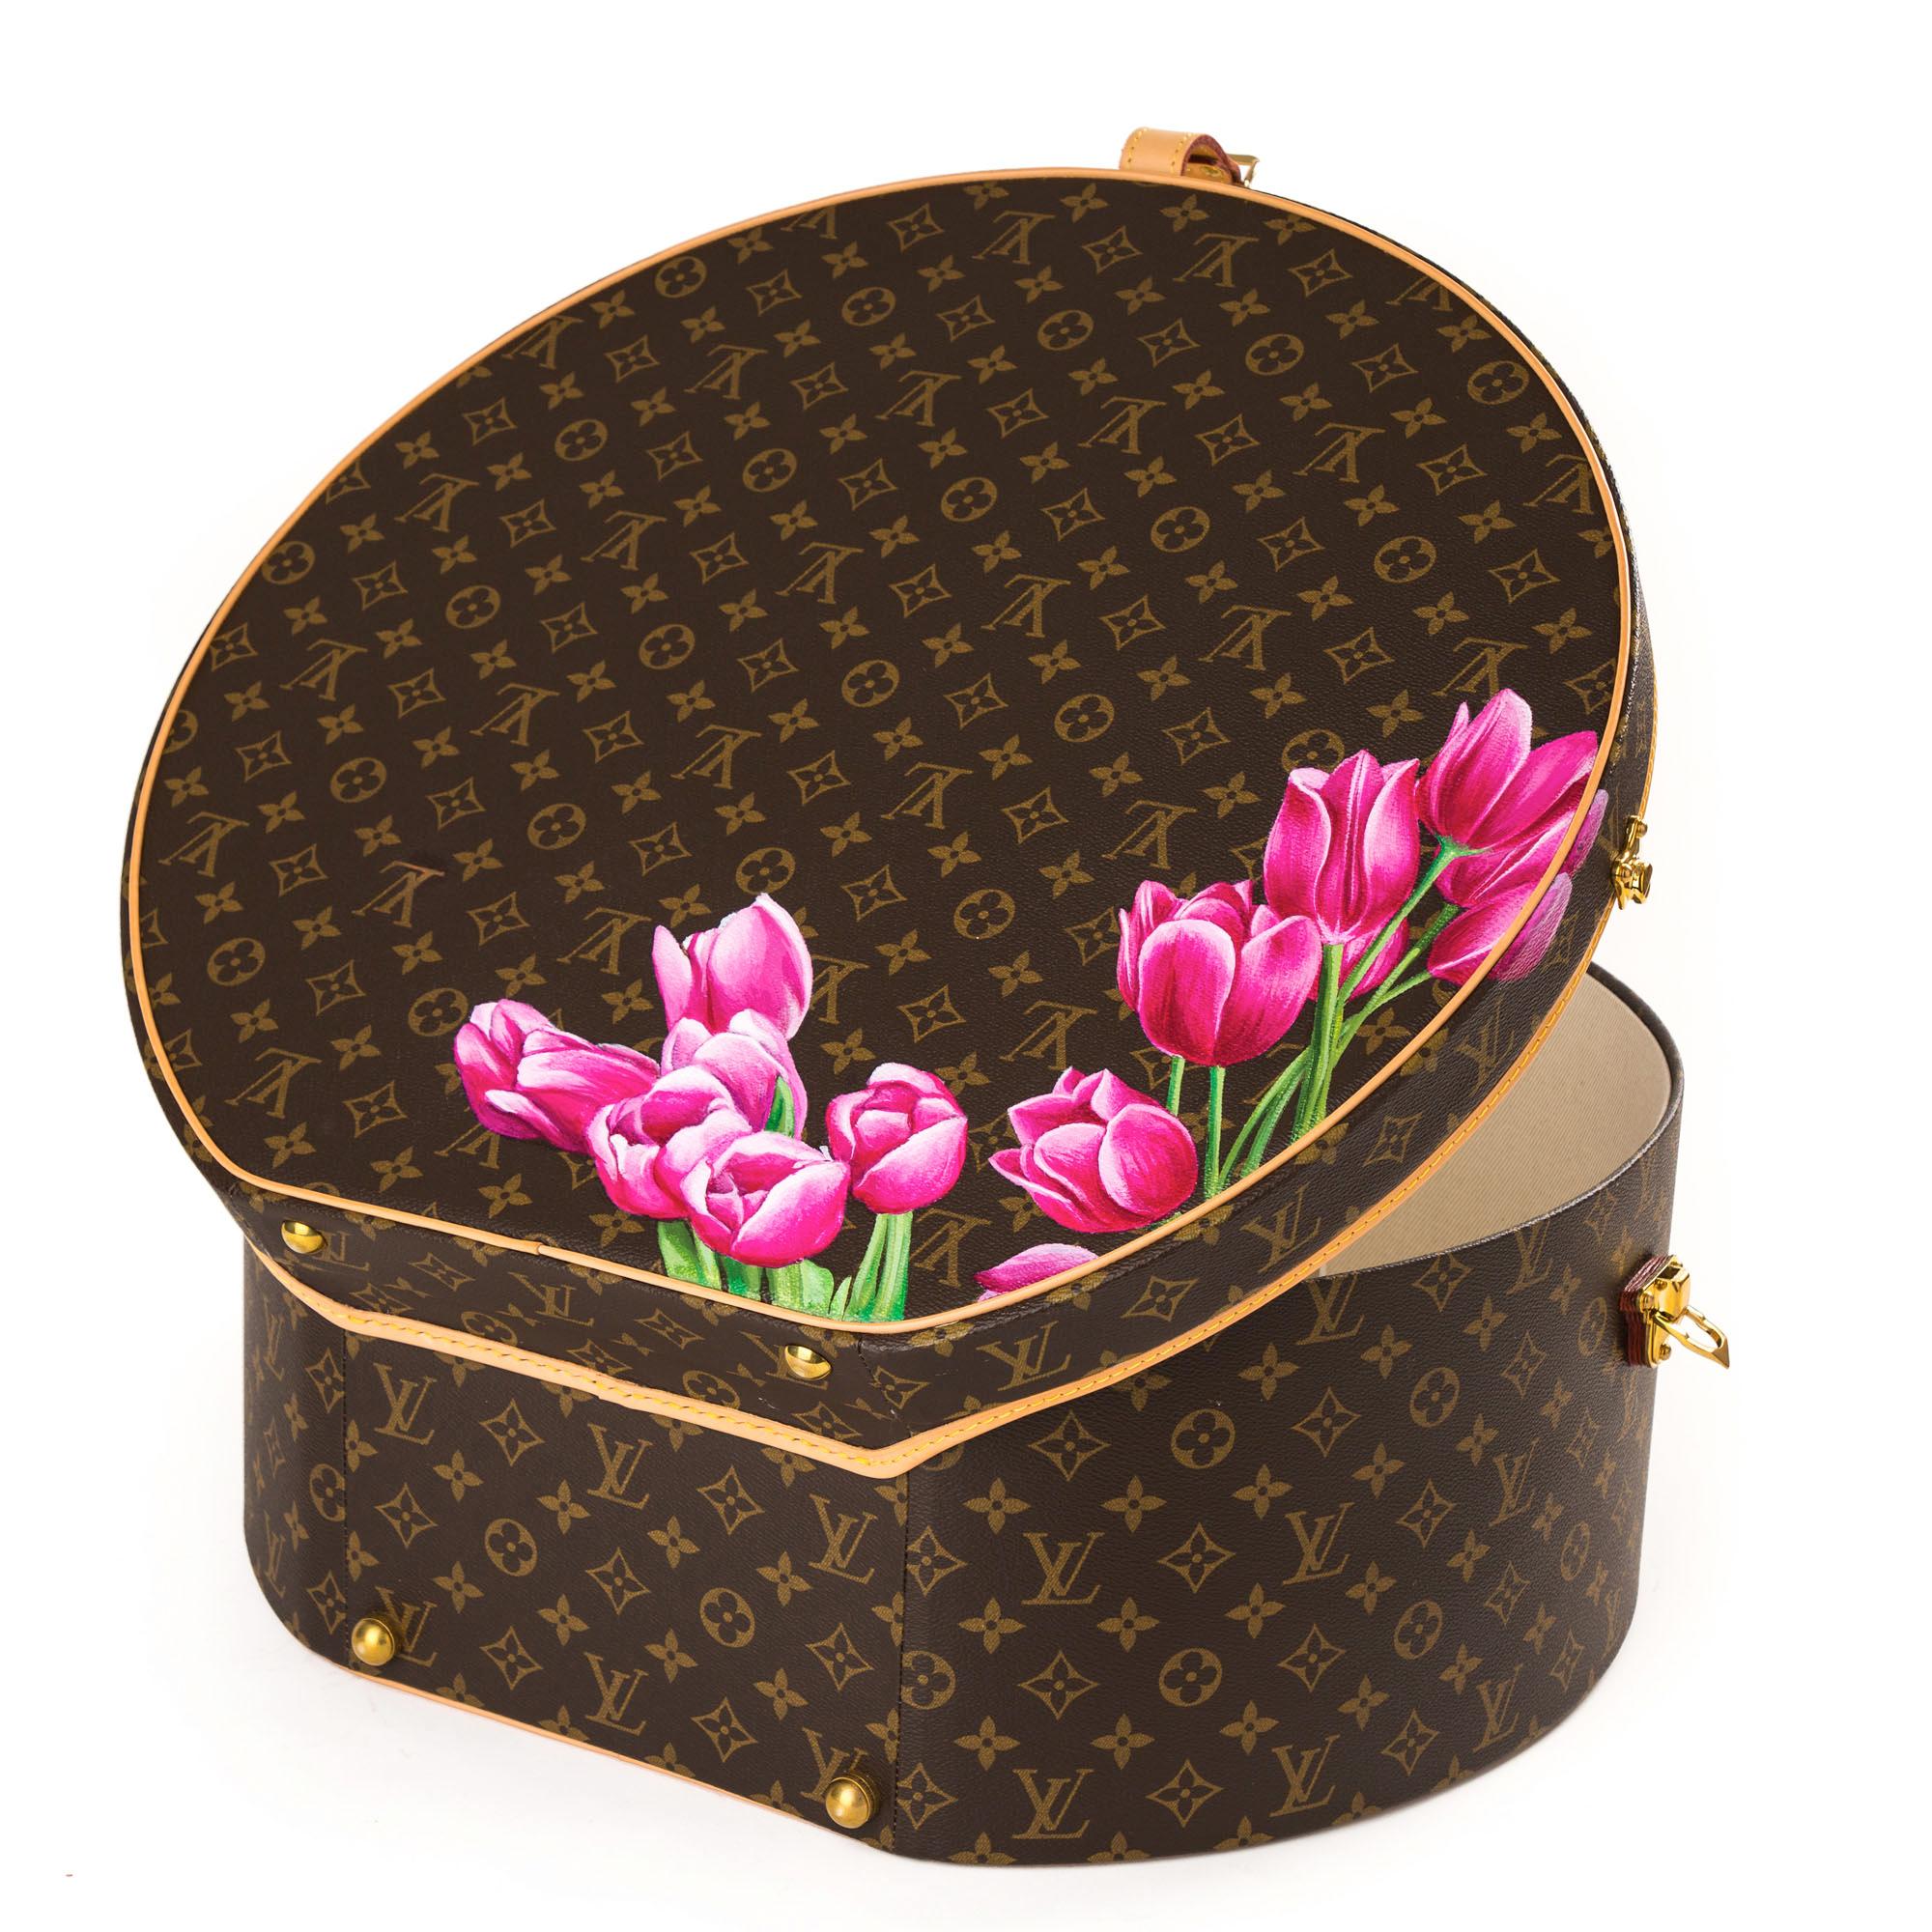 Louis Vuitton Monogram hat box with floral design.
Hand painted in Beverley Hills exclusively for Palmer & Penn.
This beautiful item is a unique one off piece.

Dimensions:
Width 50 cm.